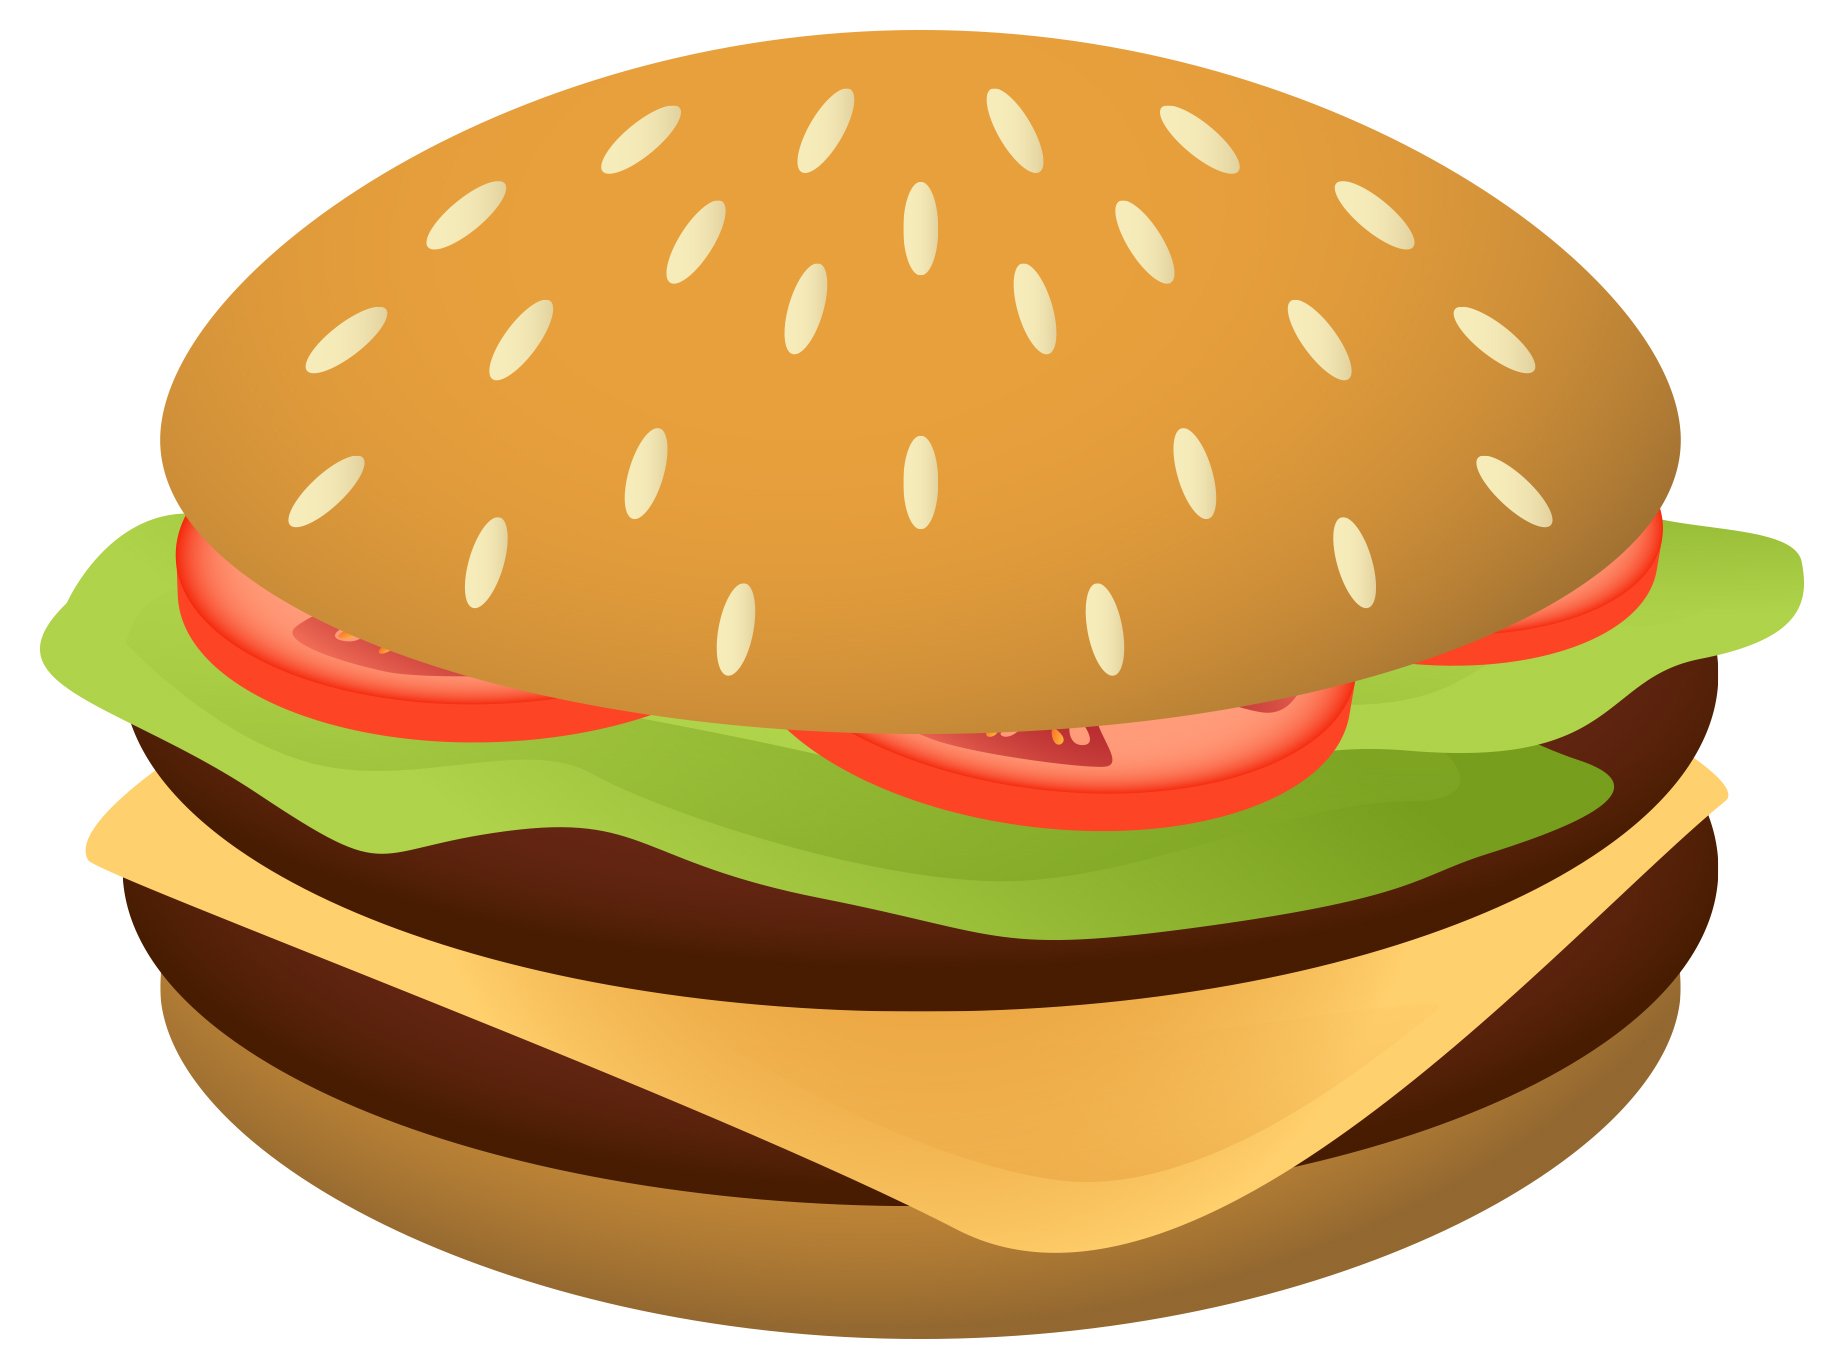 View Burger Jpg Clipart   Free Nutrition And Healthy Food Clipart